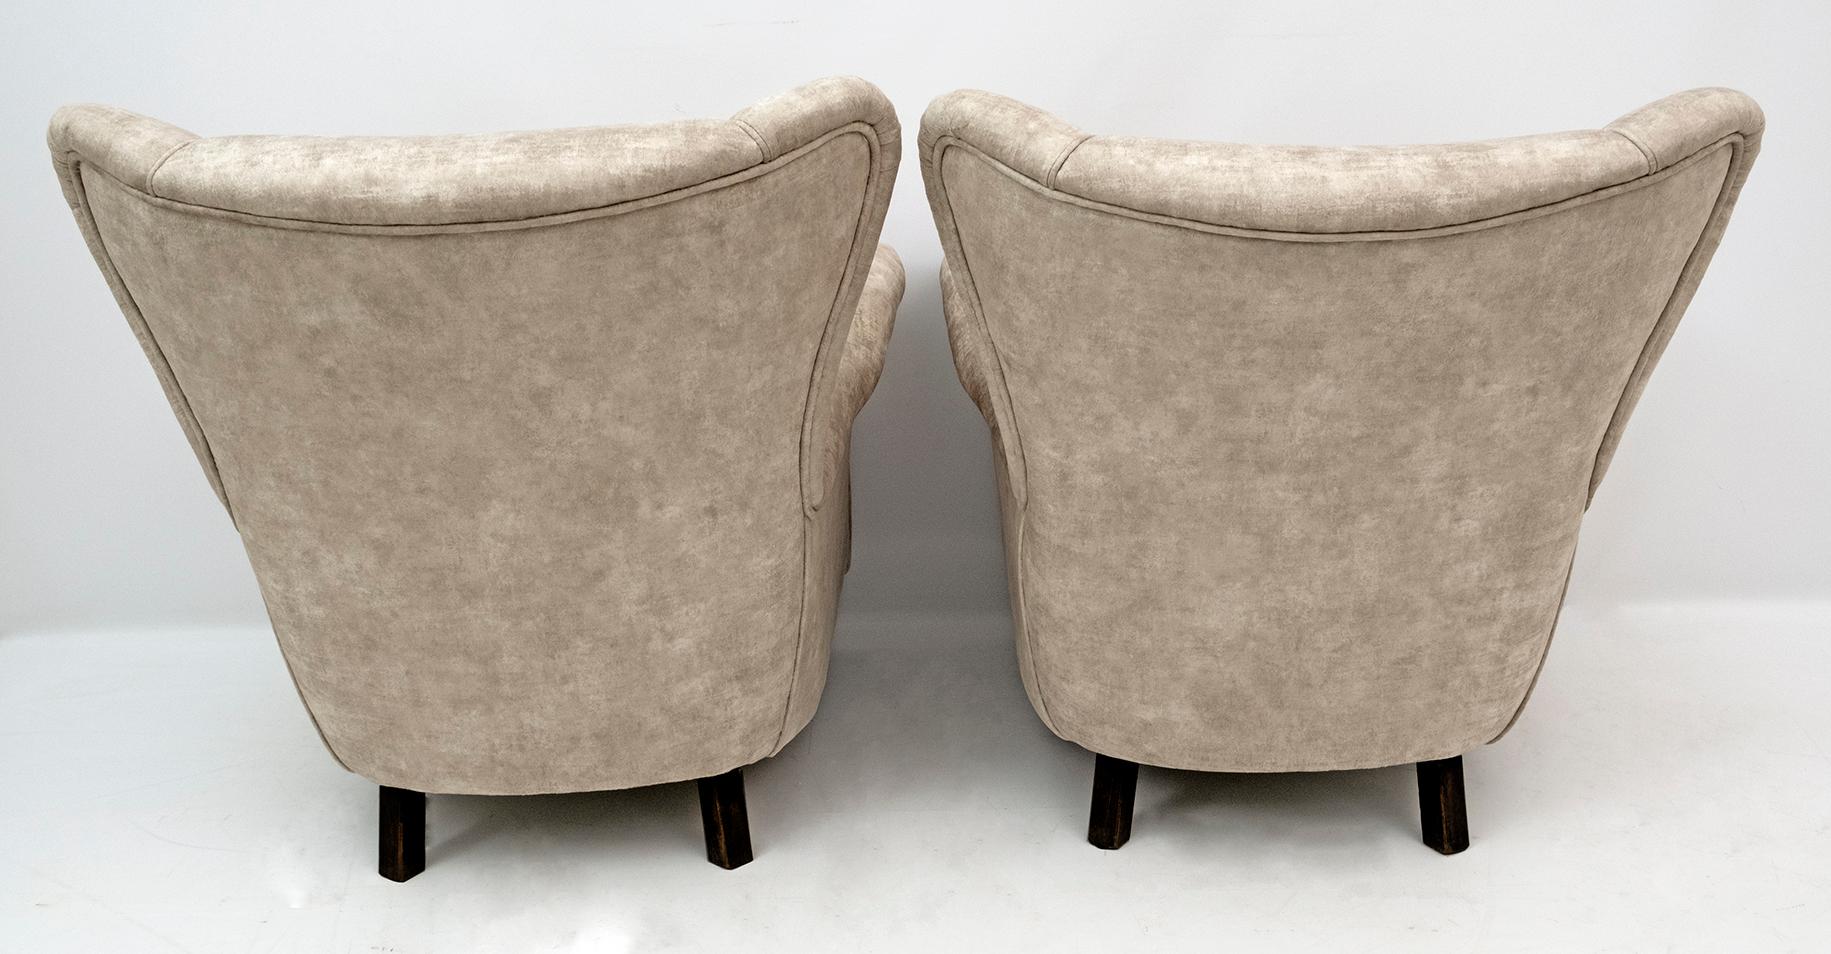 Attributed Gio Ponti Mid-Century Modern Italian Velvet Armchairs for ISA, Pair For Sale 7